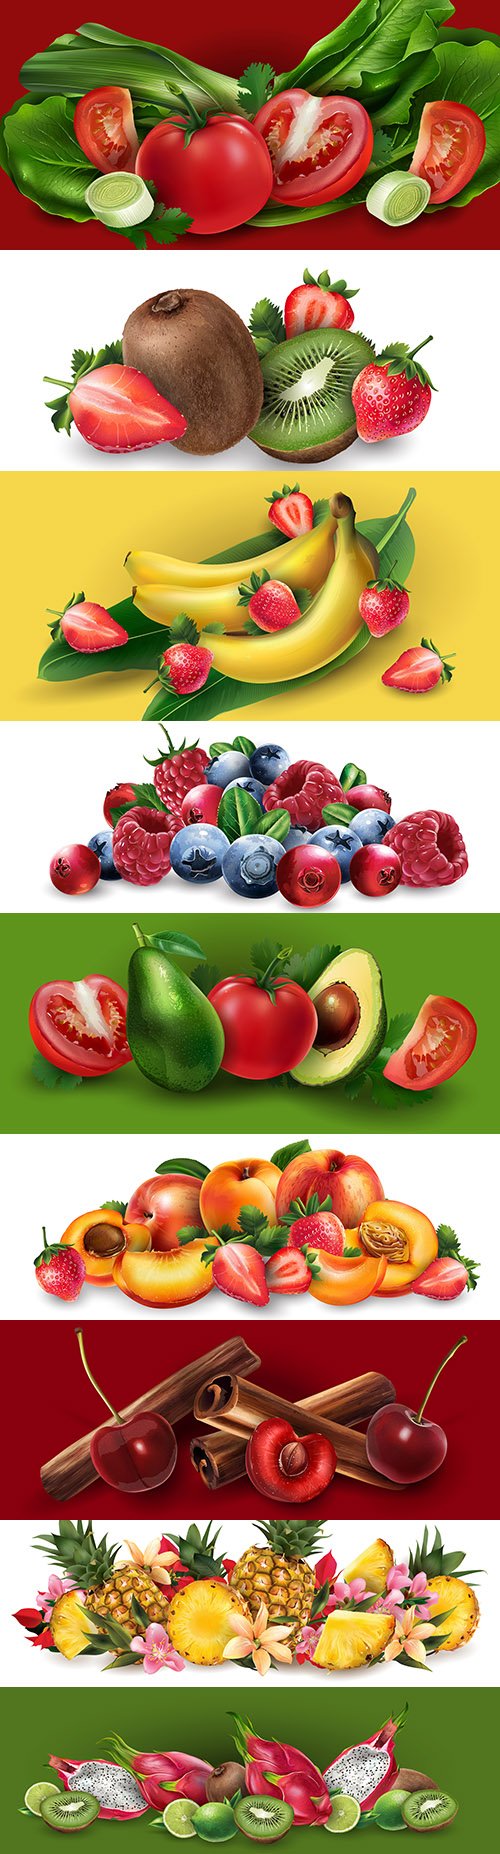 Exotic fruits and berries composition 3d illustration